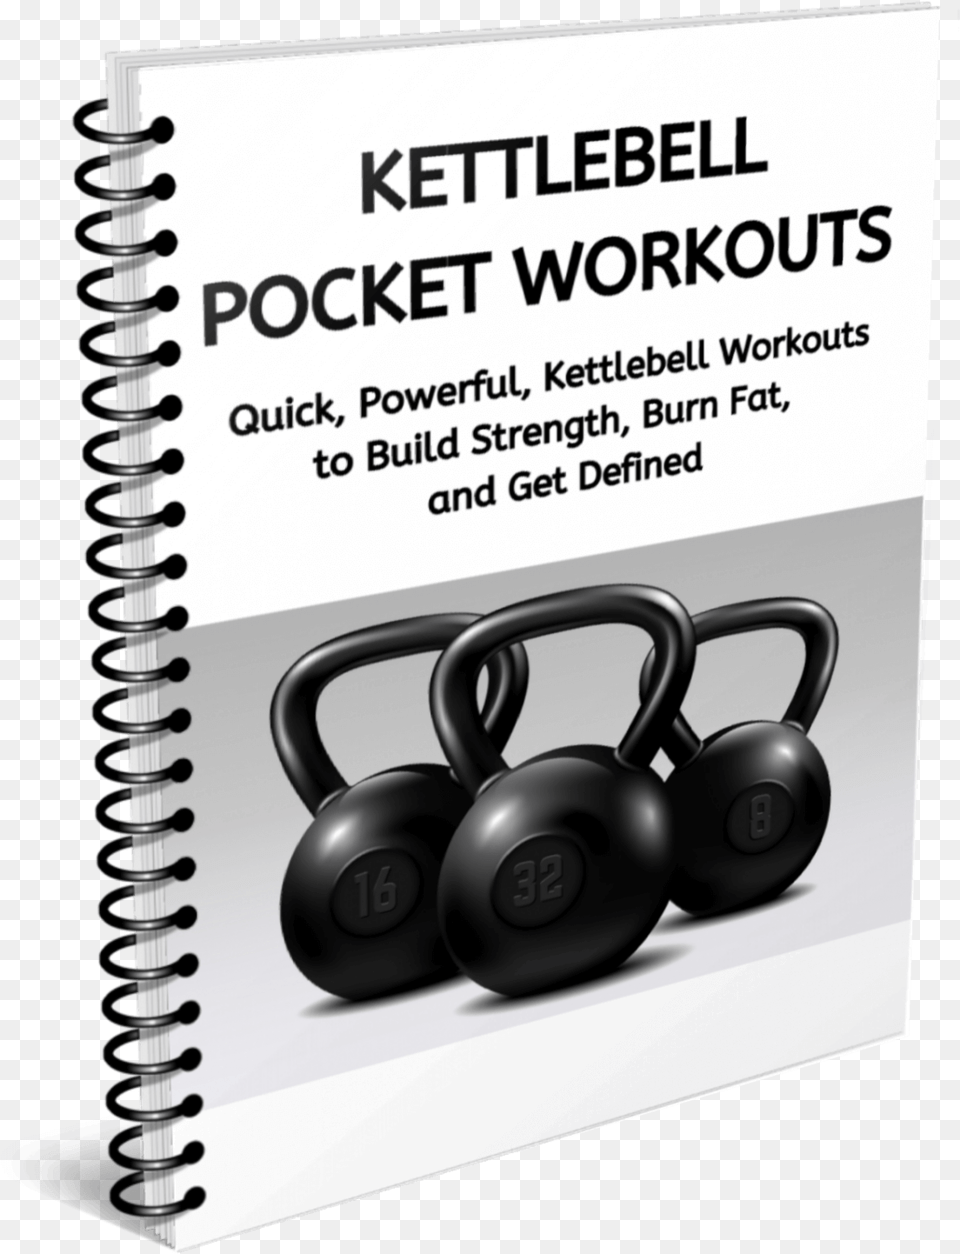 Kettlebell Pocket Workouts Sf Inner Circle Tasse, Electronics, Headphones, Working Out, Fitness Free Transparent Png